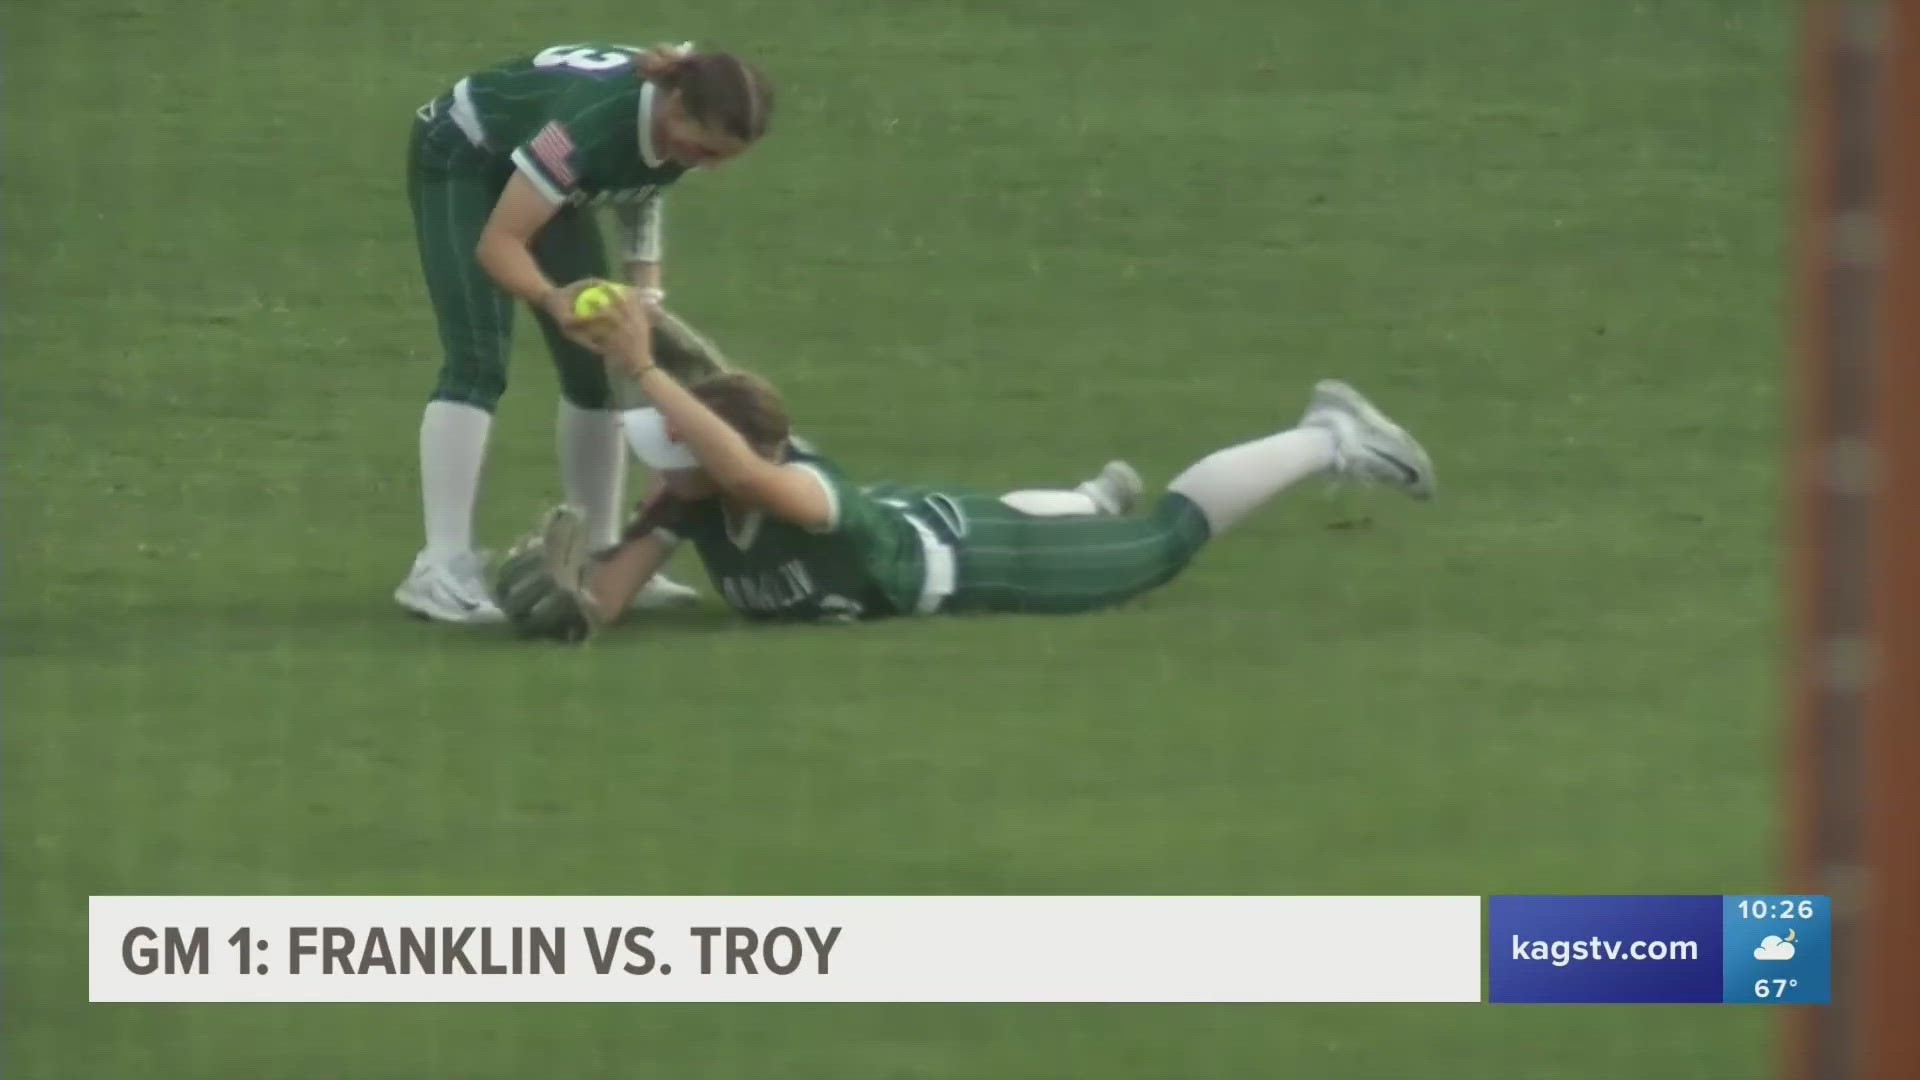 Franklin defeats Troy, 7-6, to take a 1-0 series lead.